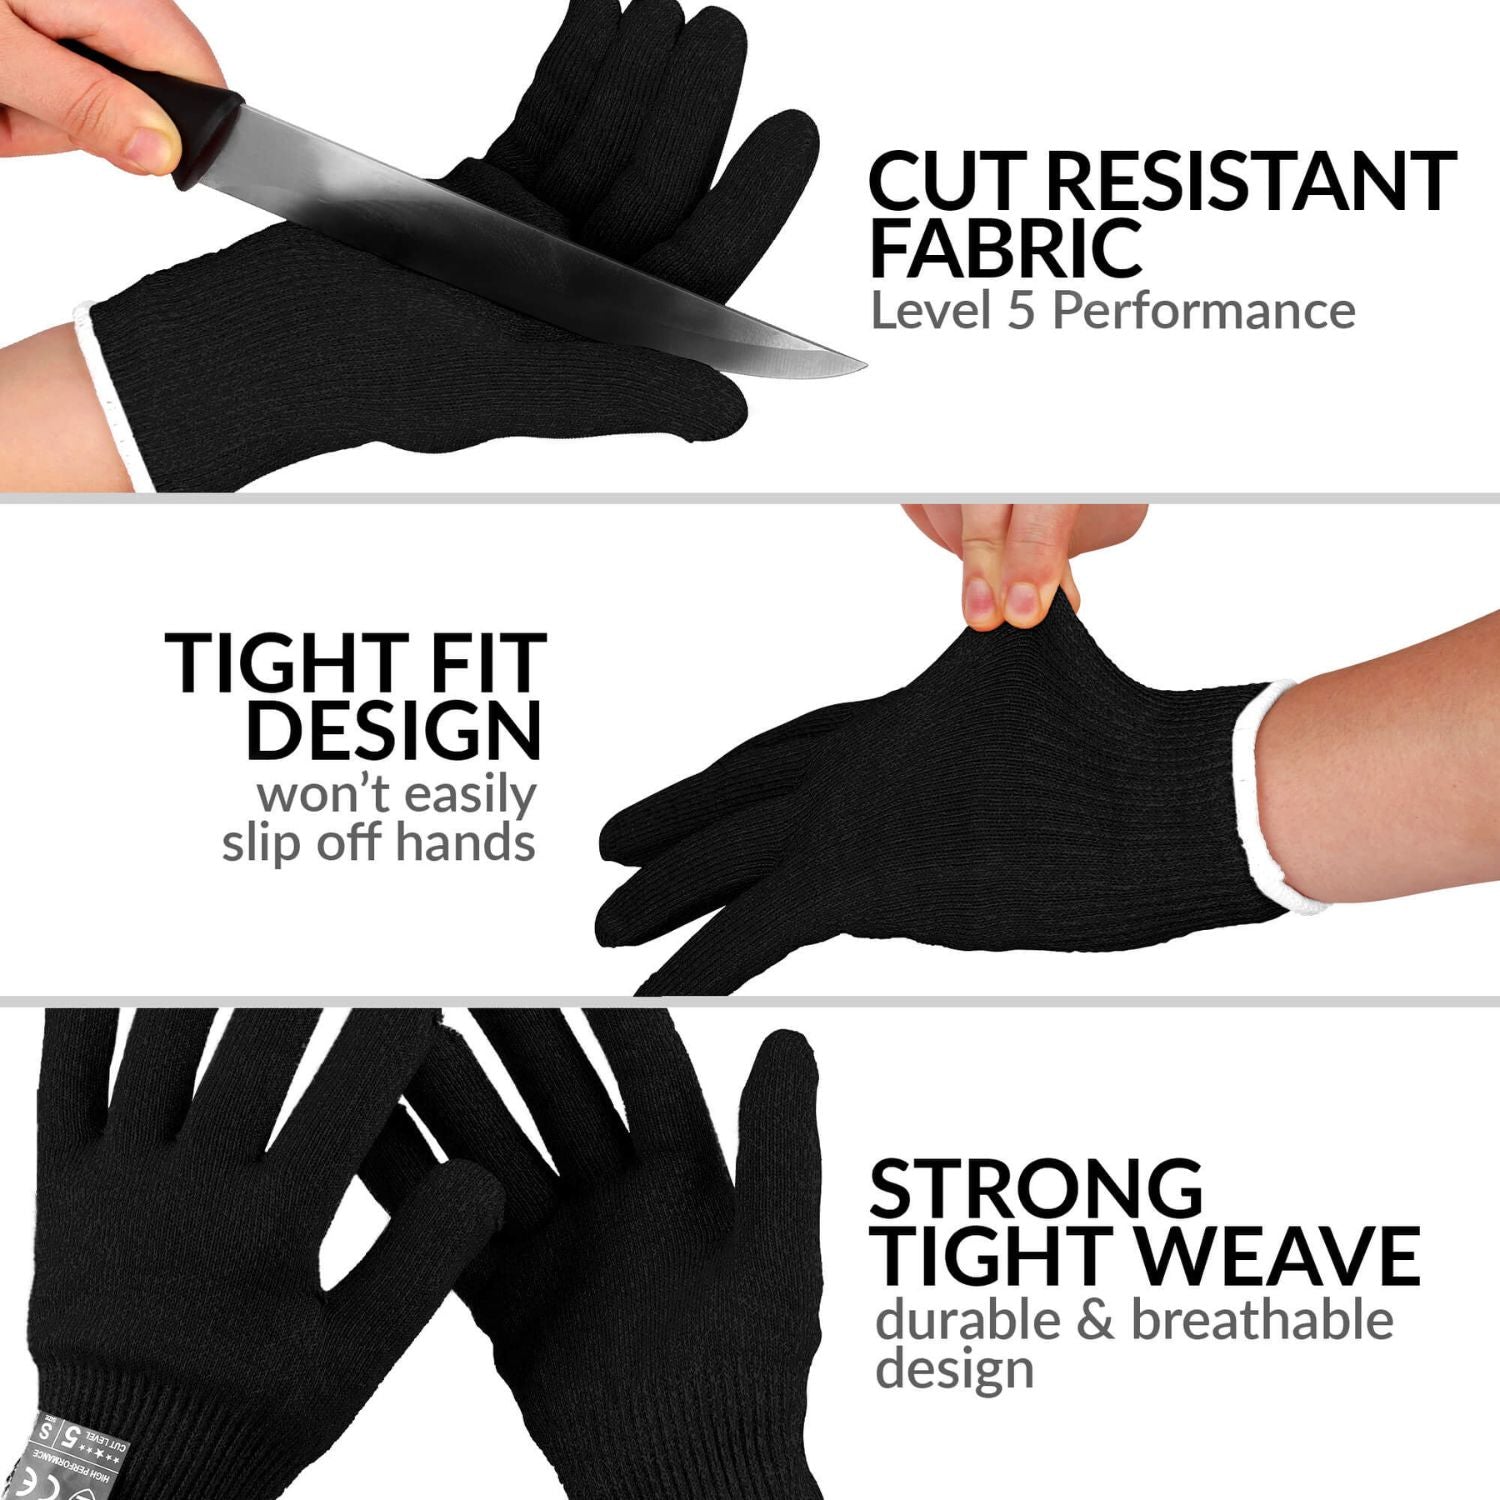 Strong tight weave knife gloves